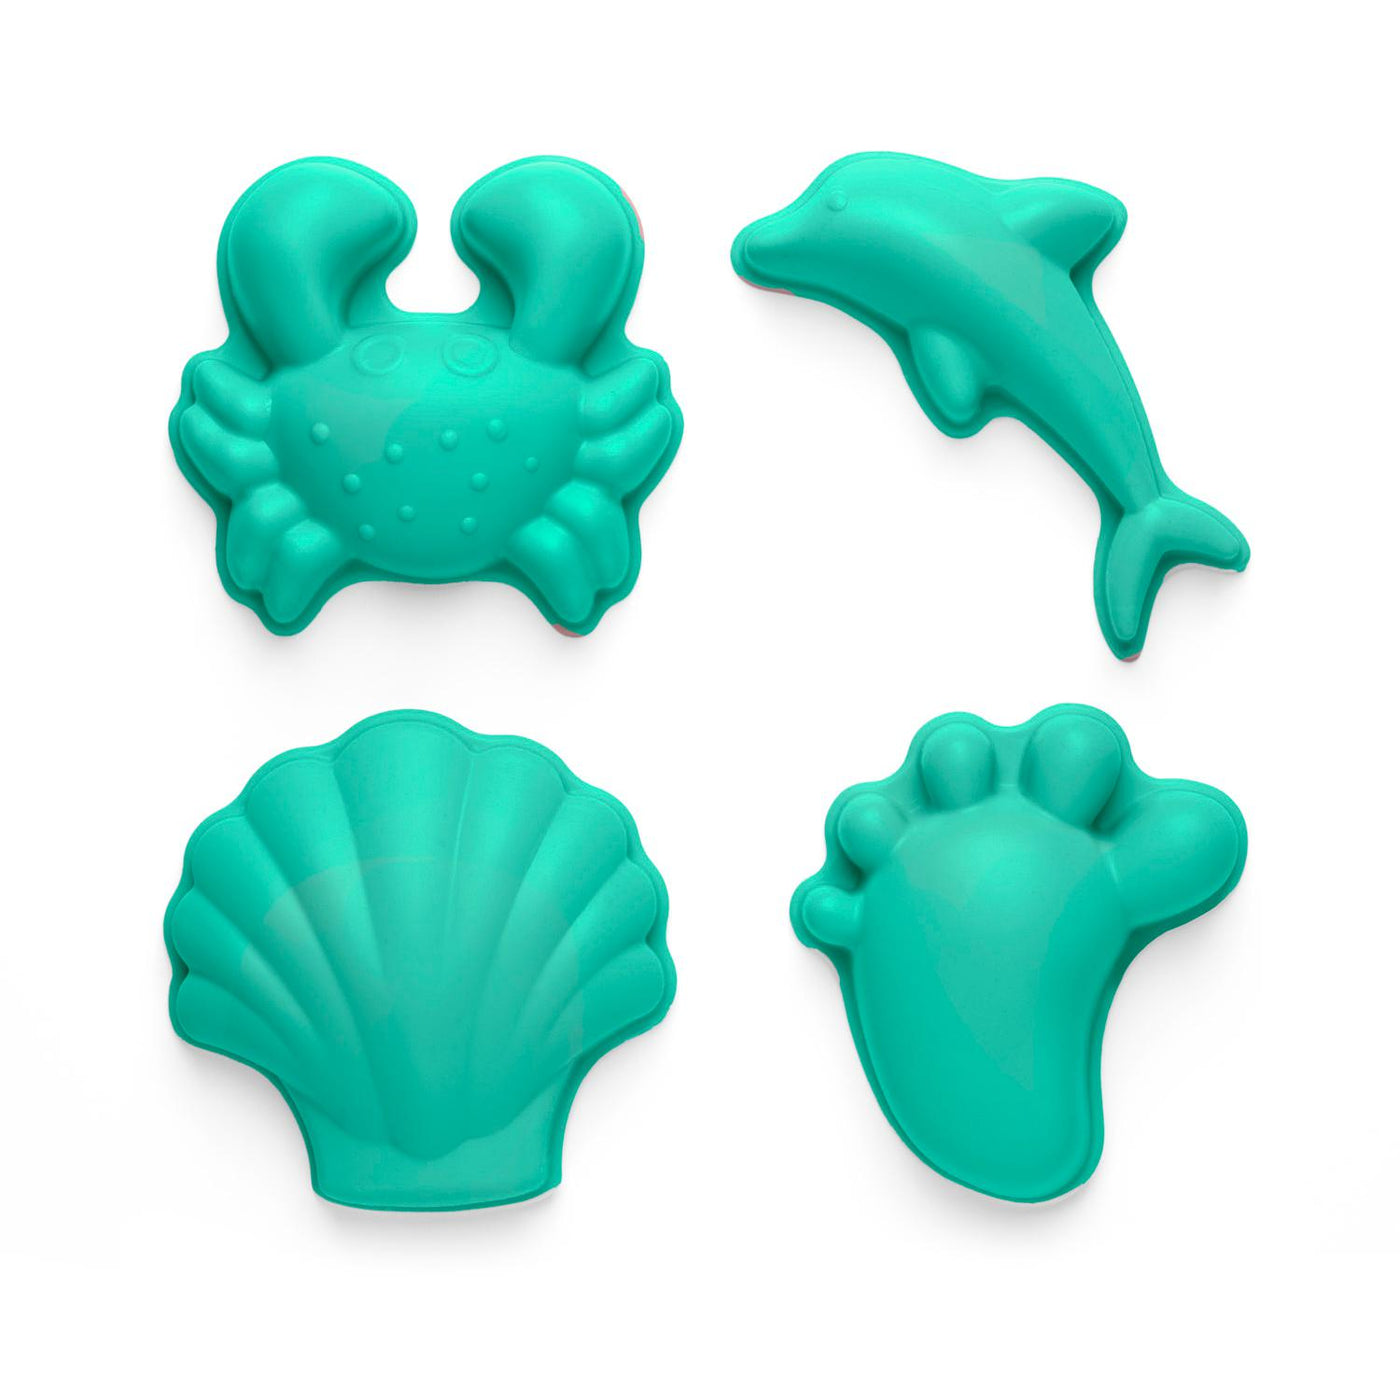 Scrunch Silicone Footprint Sand Moulds Beach & Sand Toy